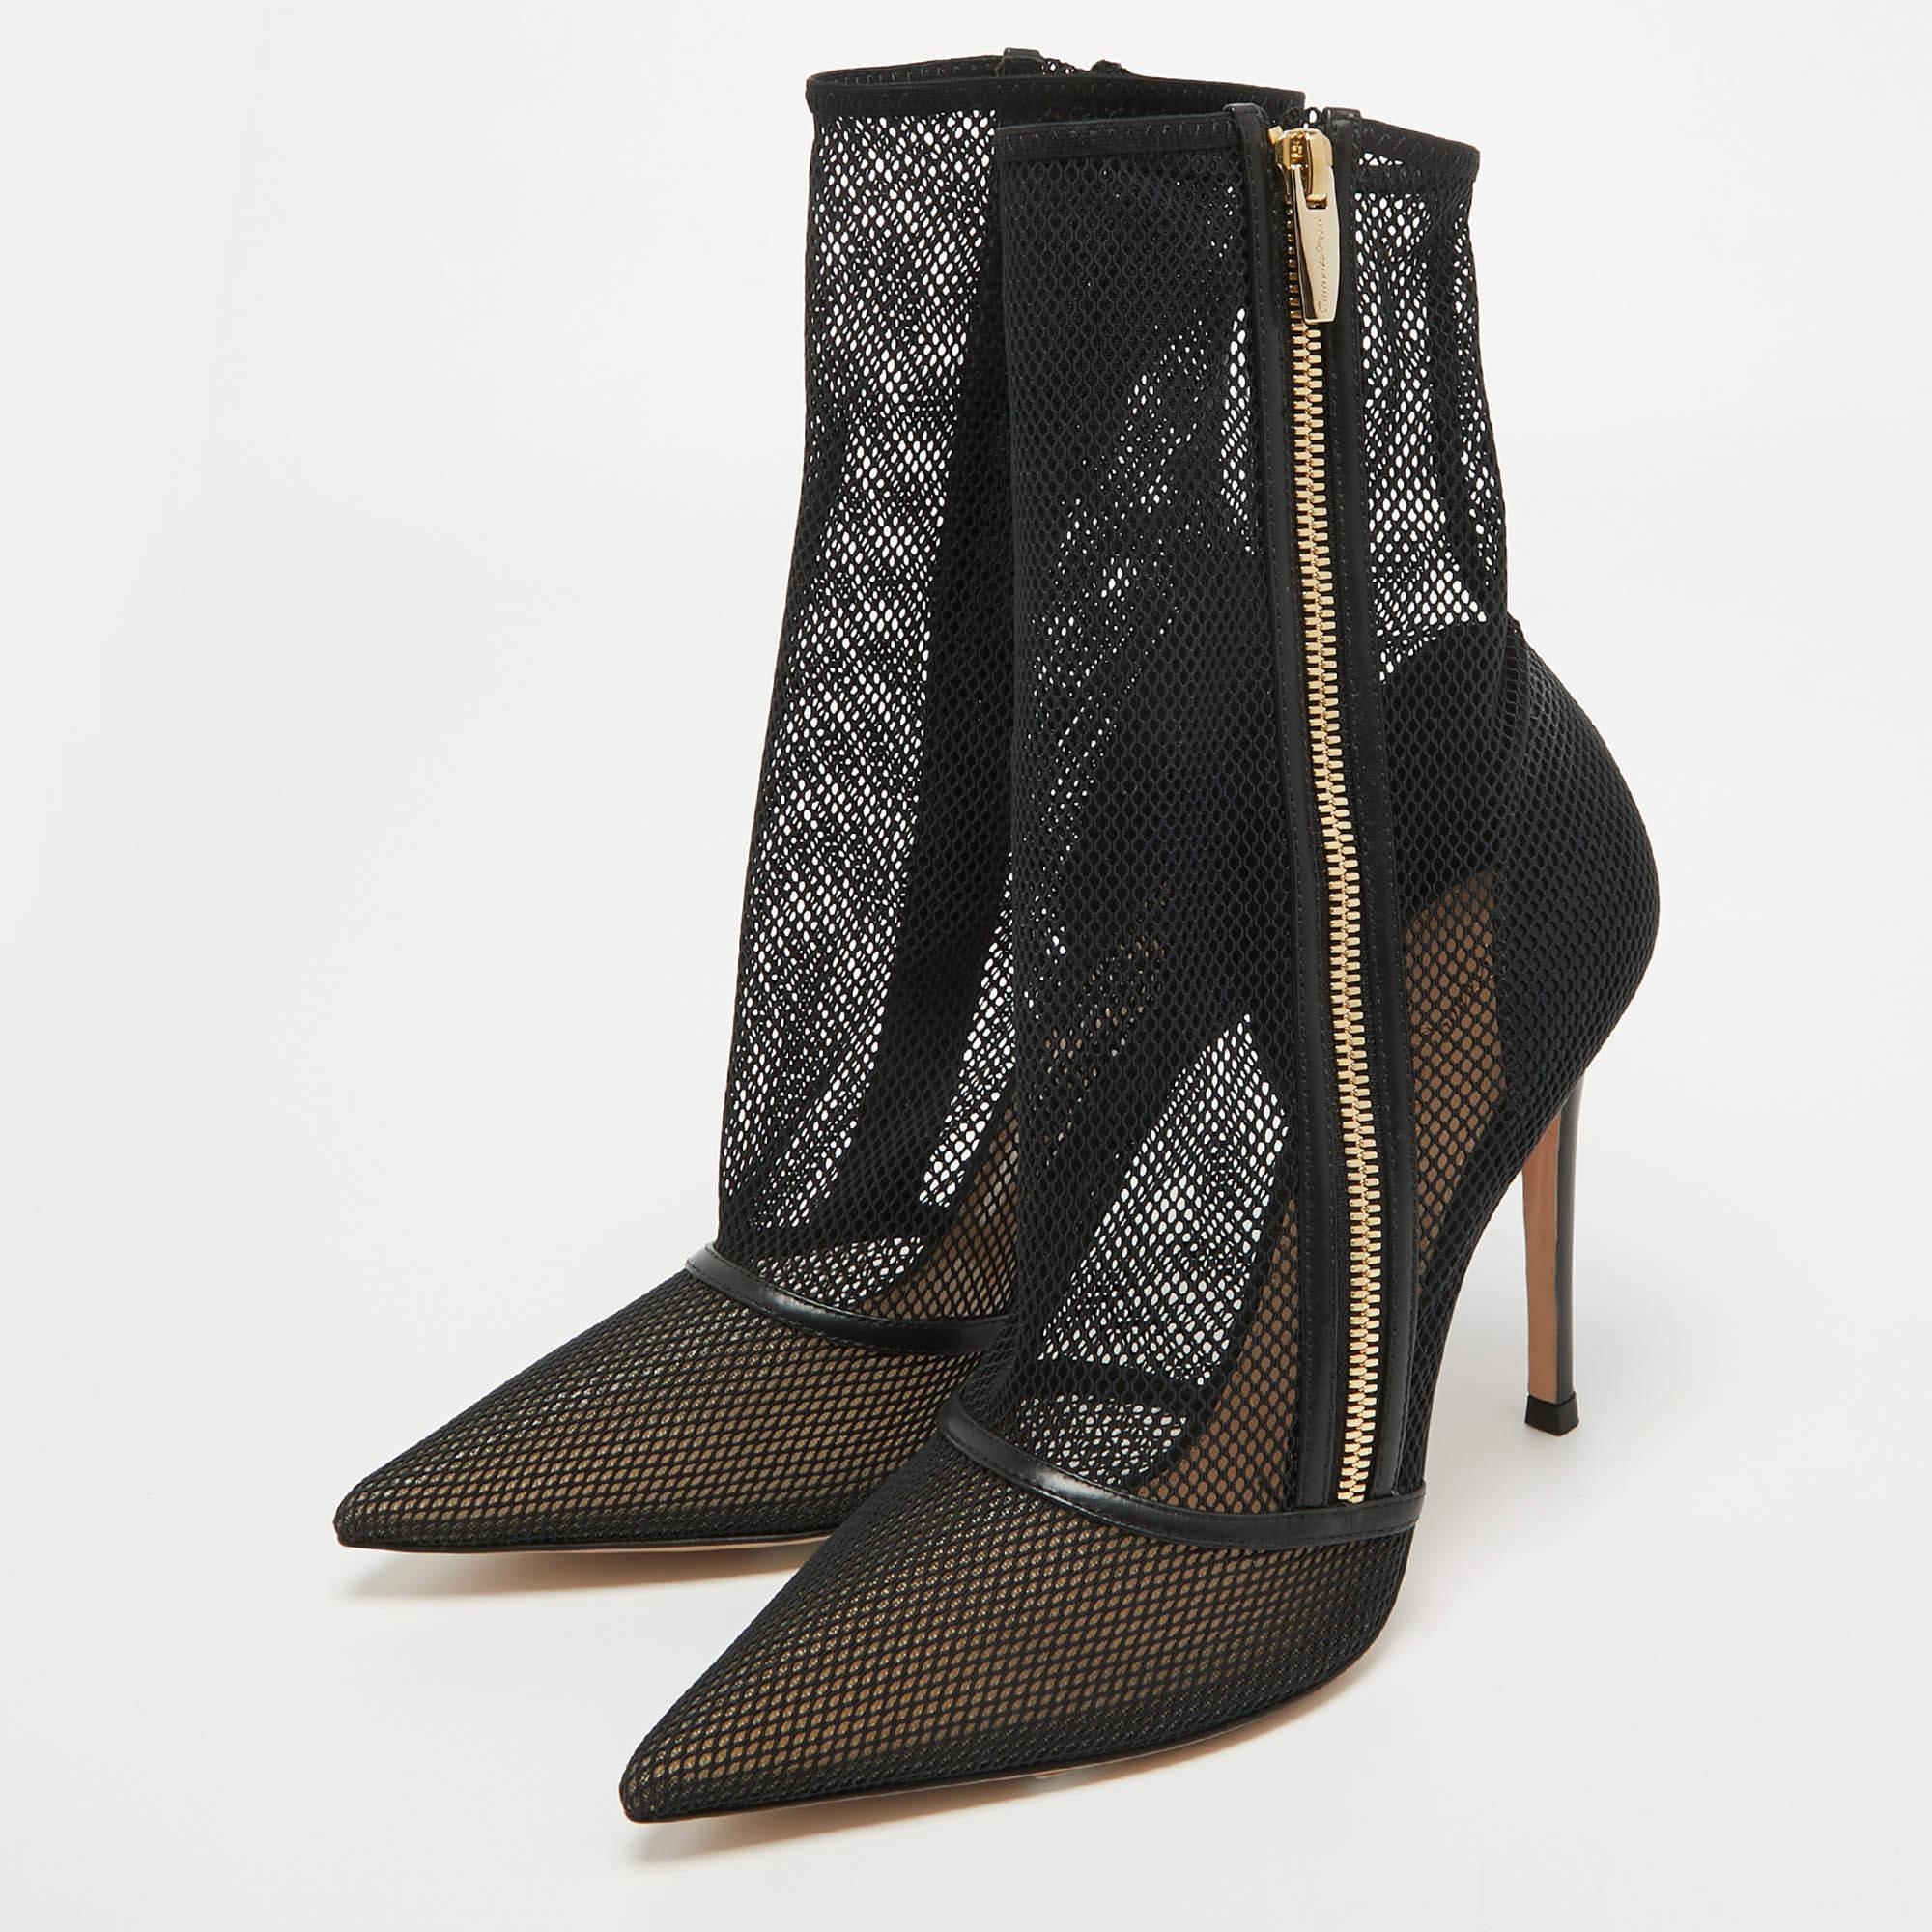 Gianvito Rossi Black Mesh and Leather Pointed Toe Ankle Boots Size 38 For Sale 5